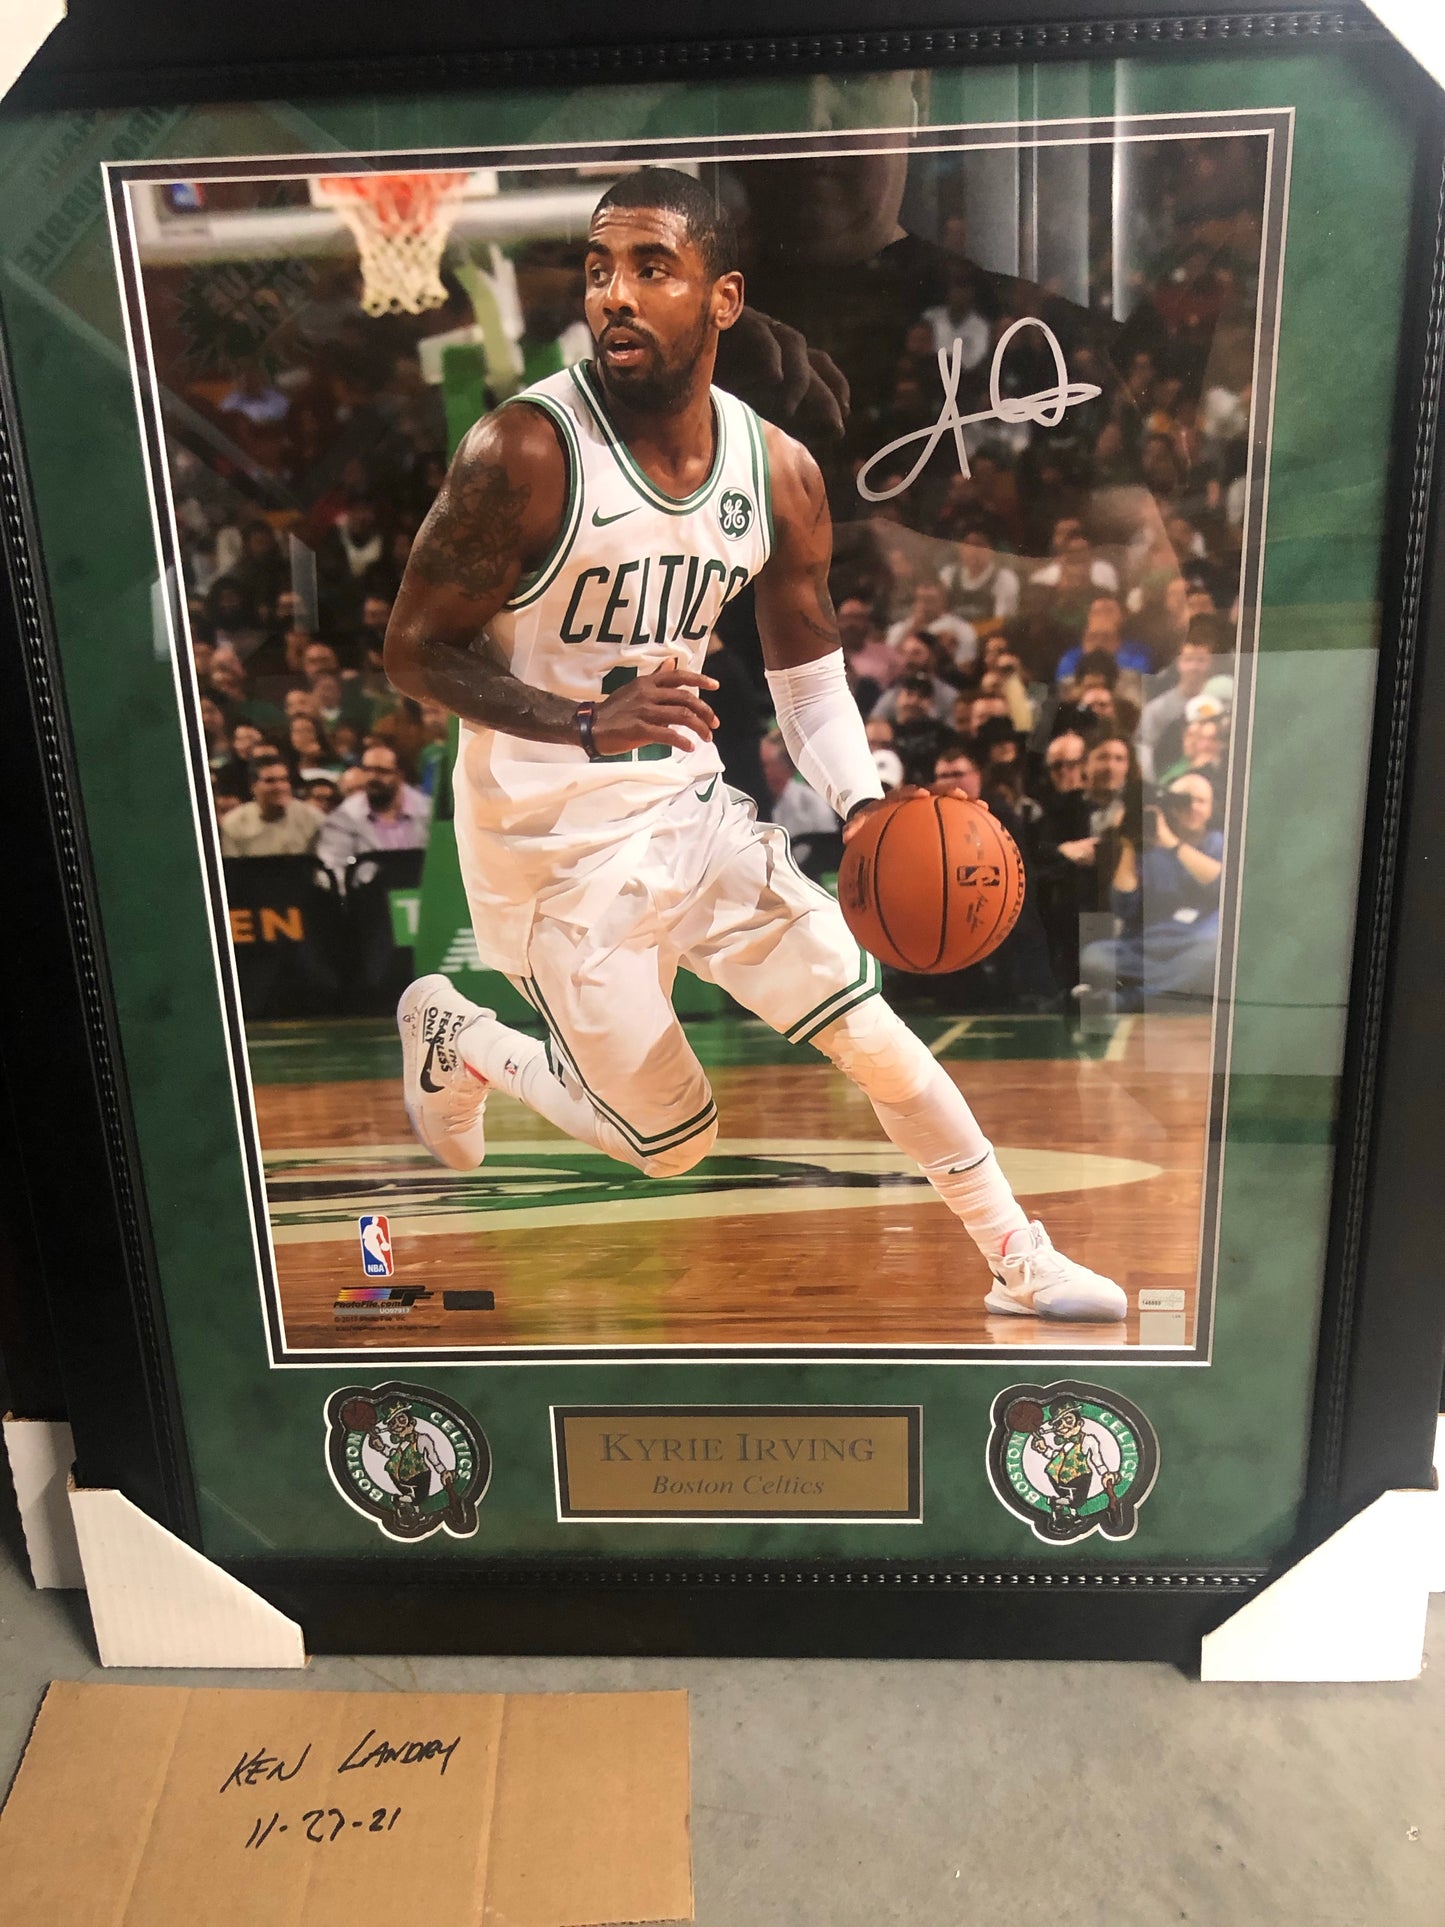 Kyrie Irving signed 16x20 framed with Panini Certification